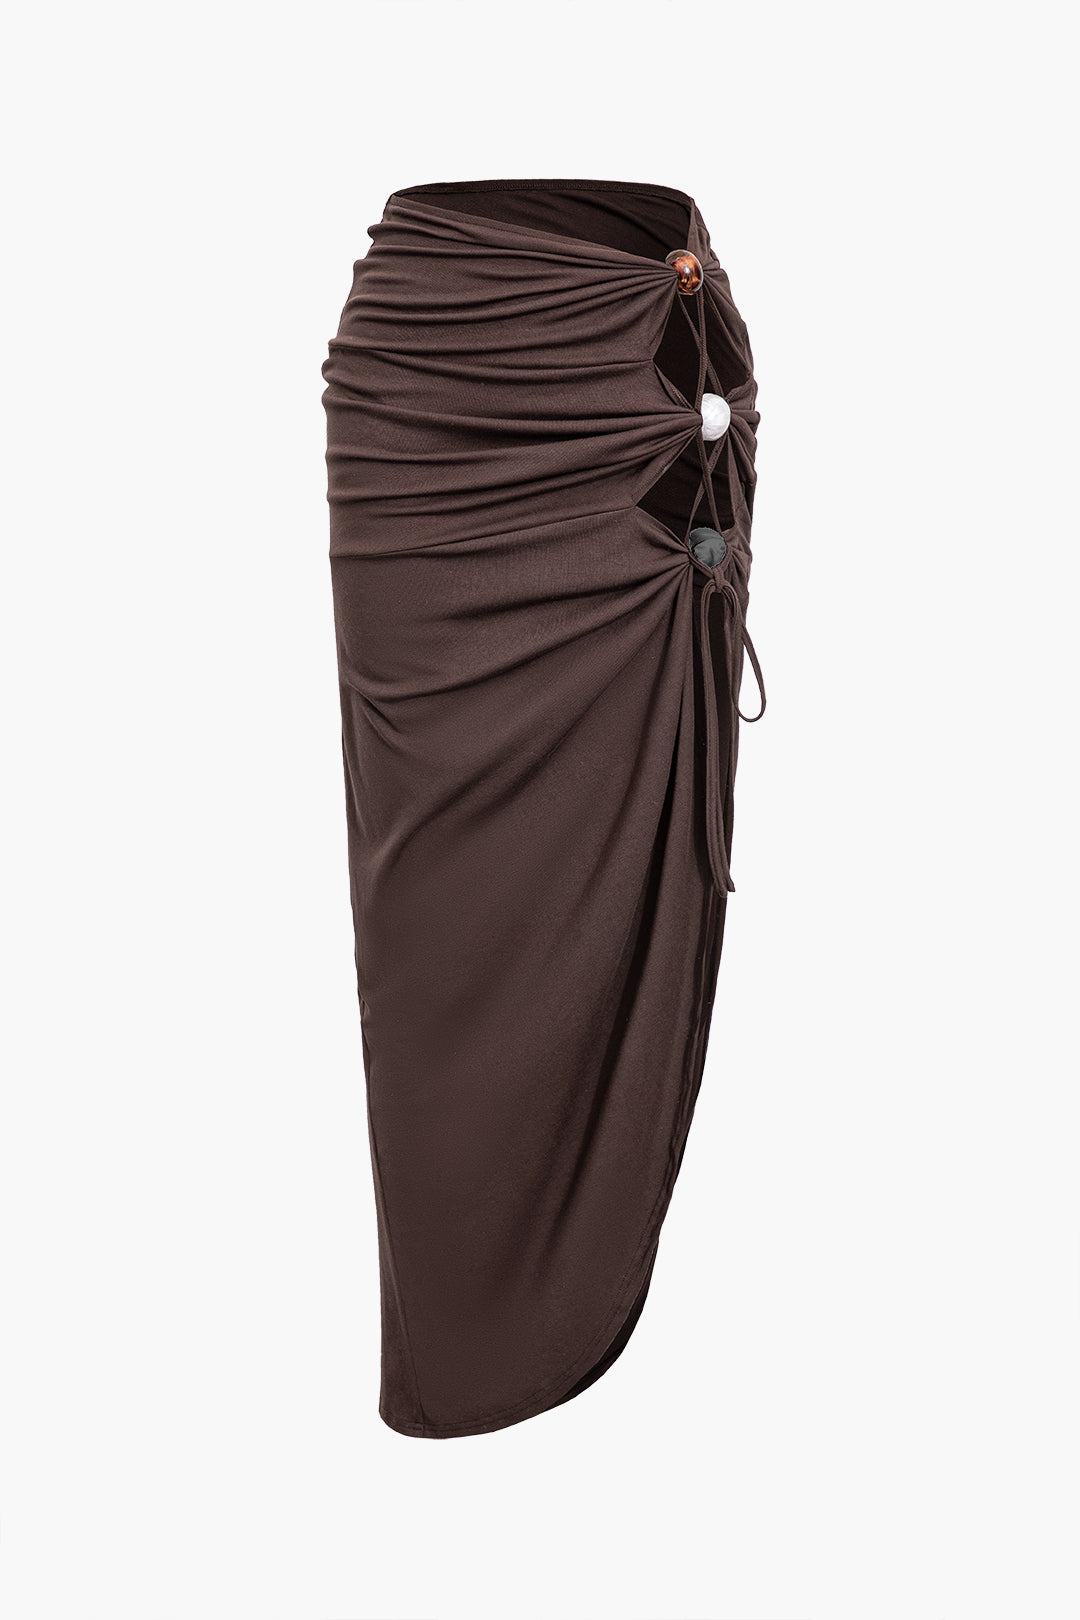 Bead Detail Cut Out Ruched Split Maxi Skirt